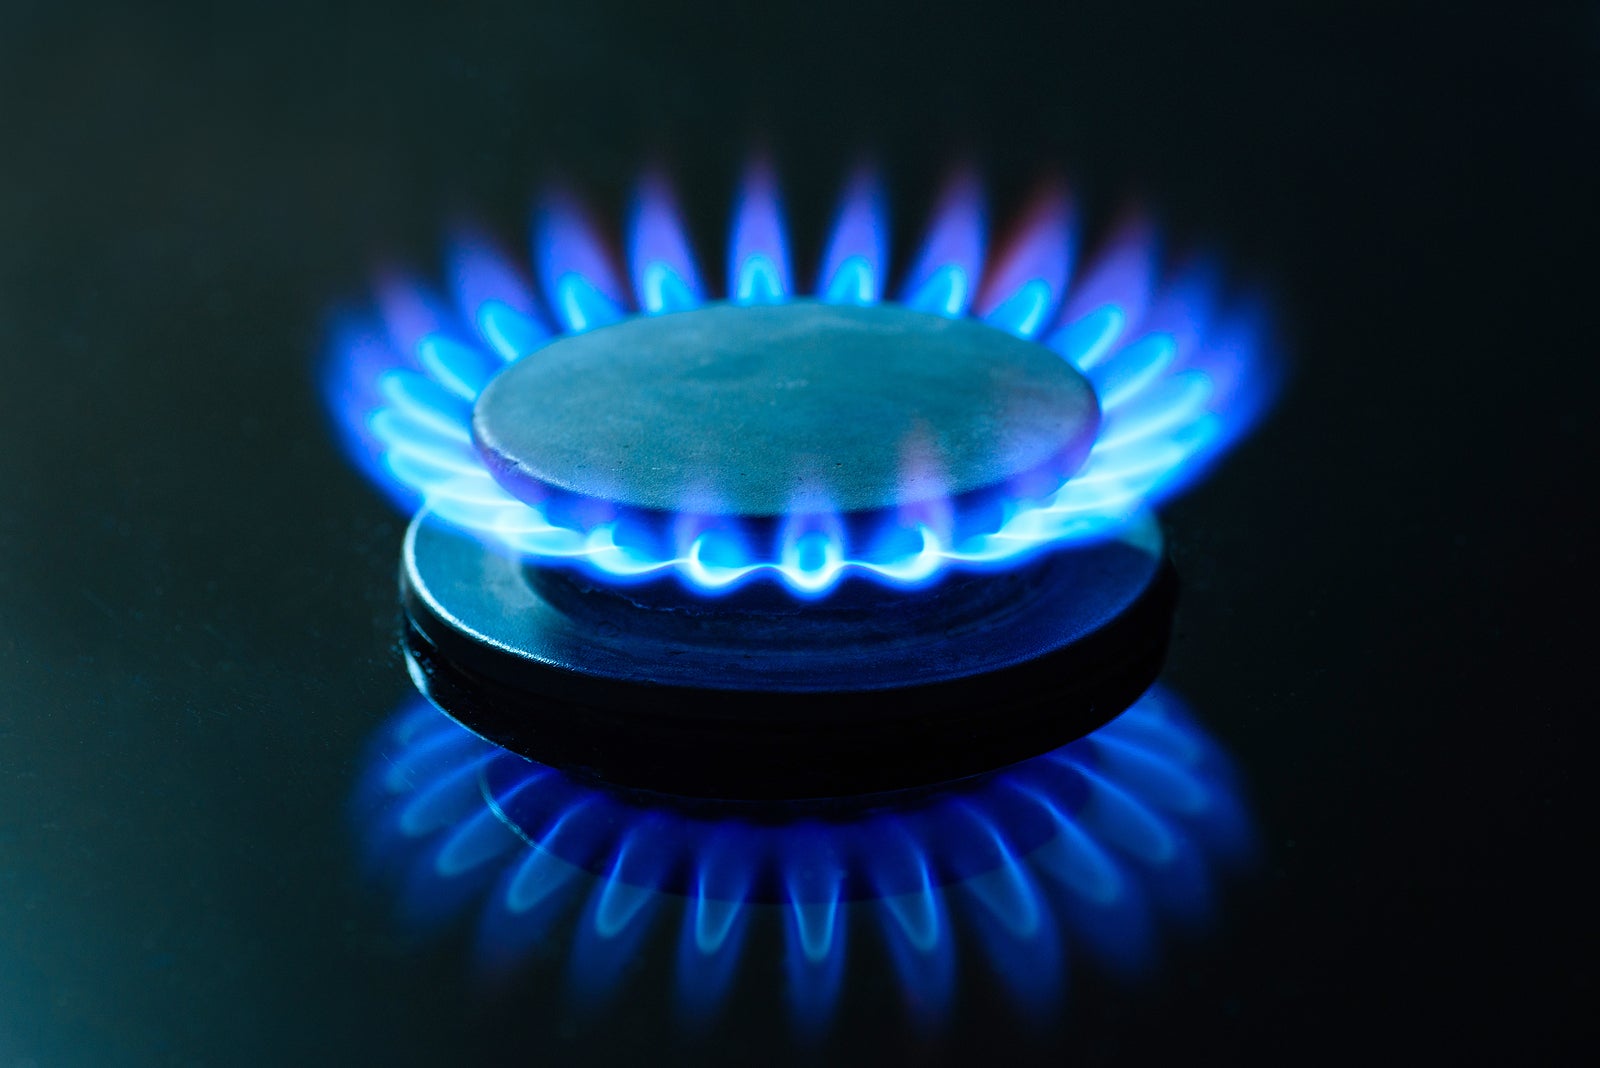 energy-co-op-bringing-renewable-natural-gas-service-to-philly-whyy